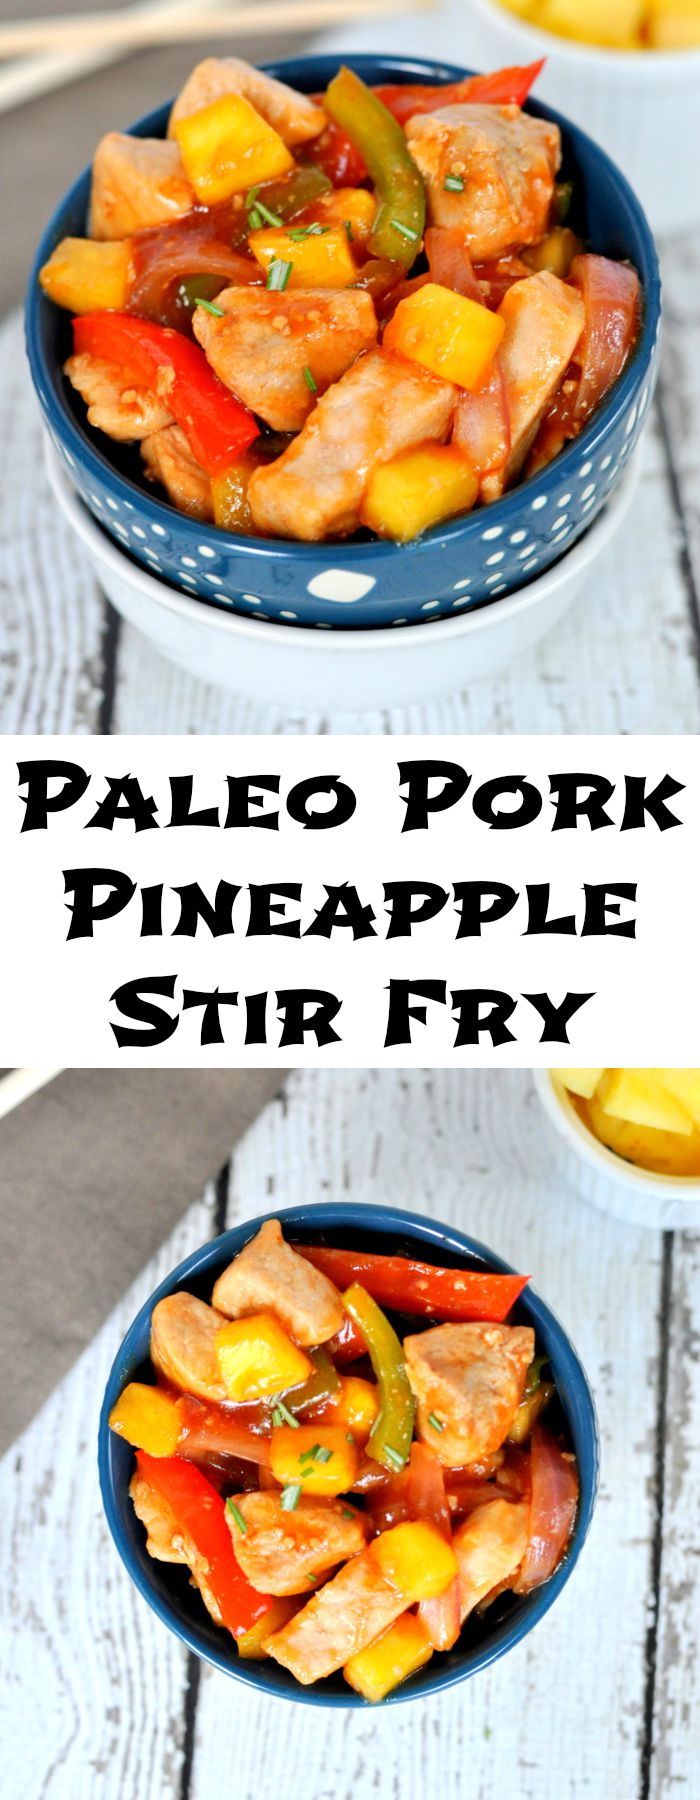 Paleo Pork Pineapple Stir Fry is the perfect quick and easy meal.